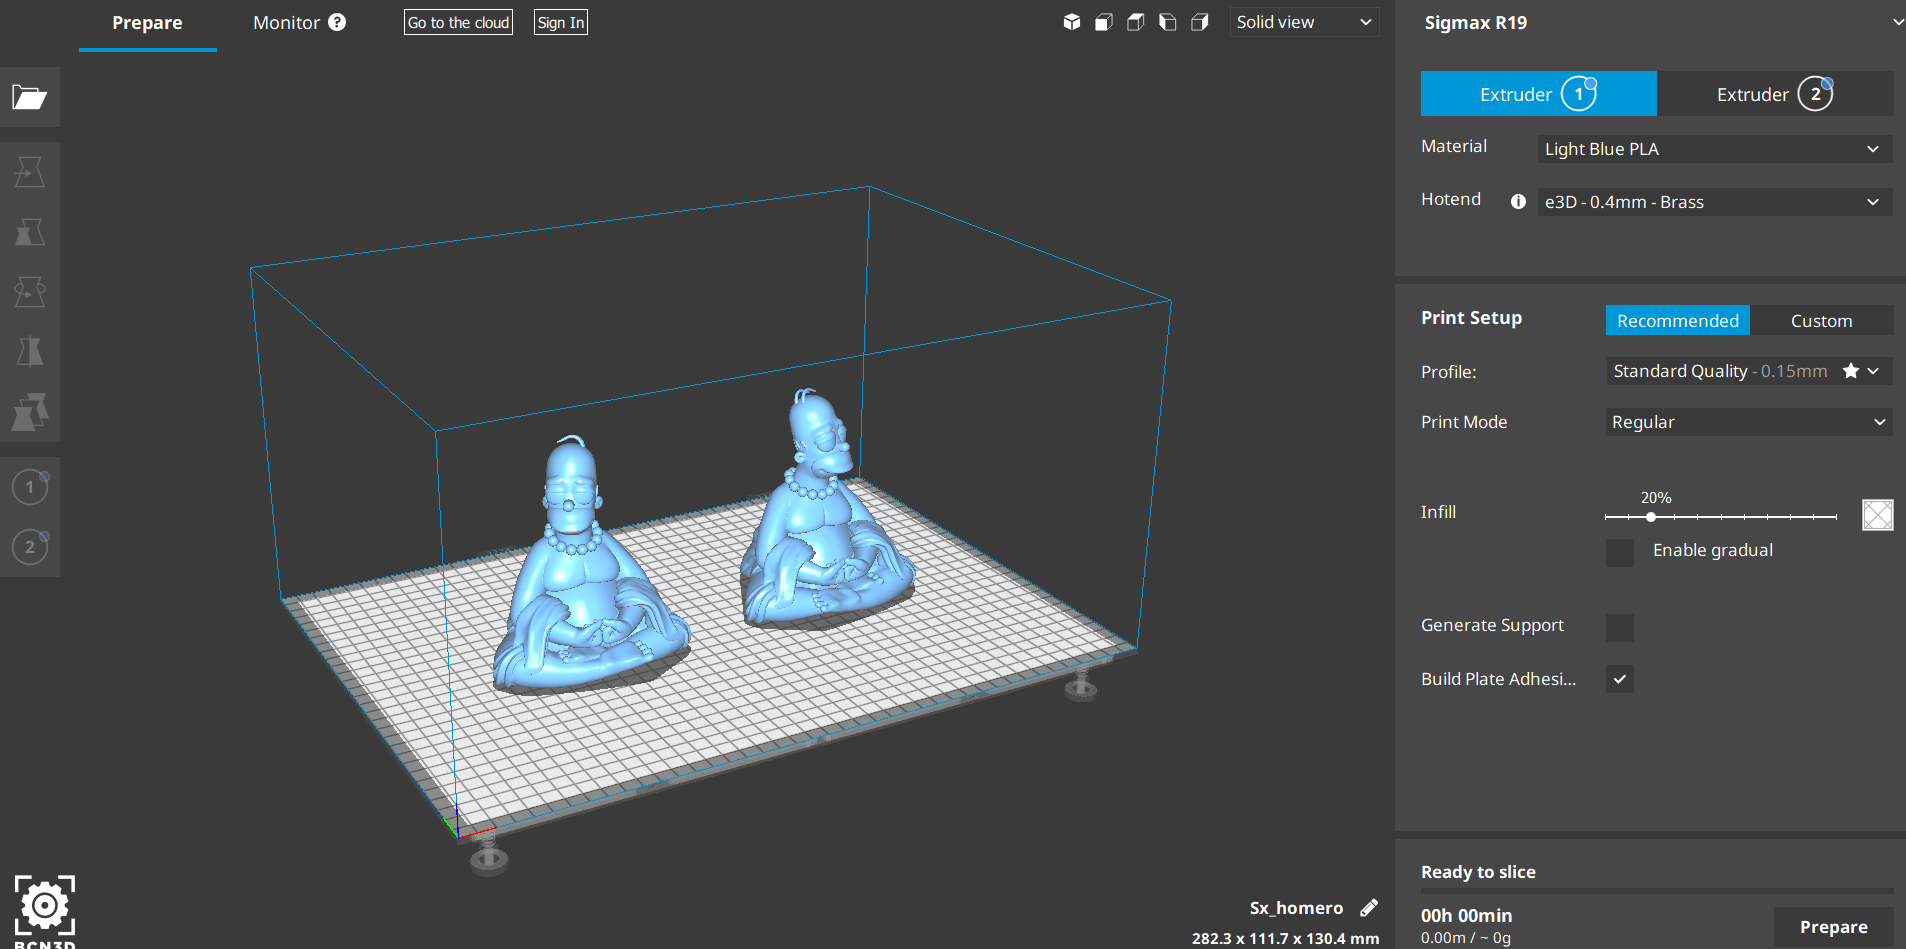 BCN3D Cura user interface. Image by 3D Printing Industry.